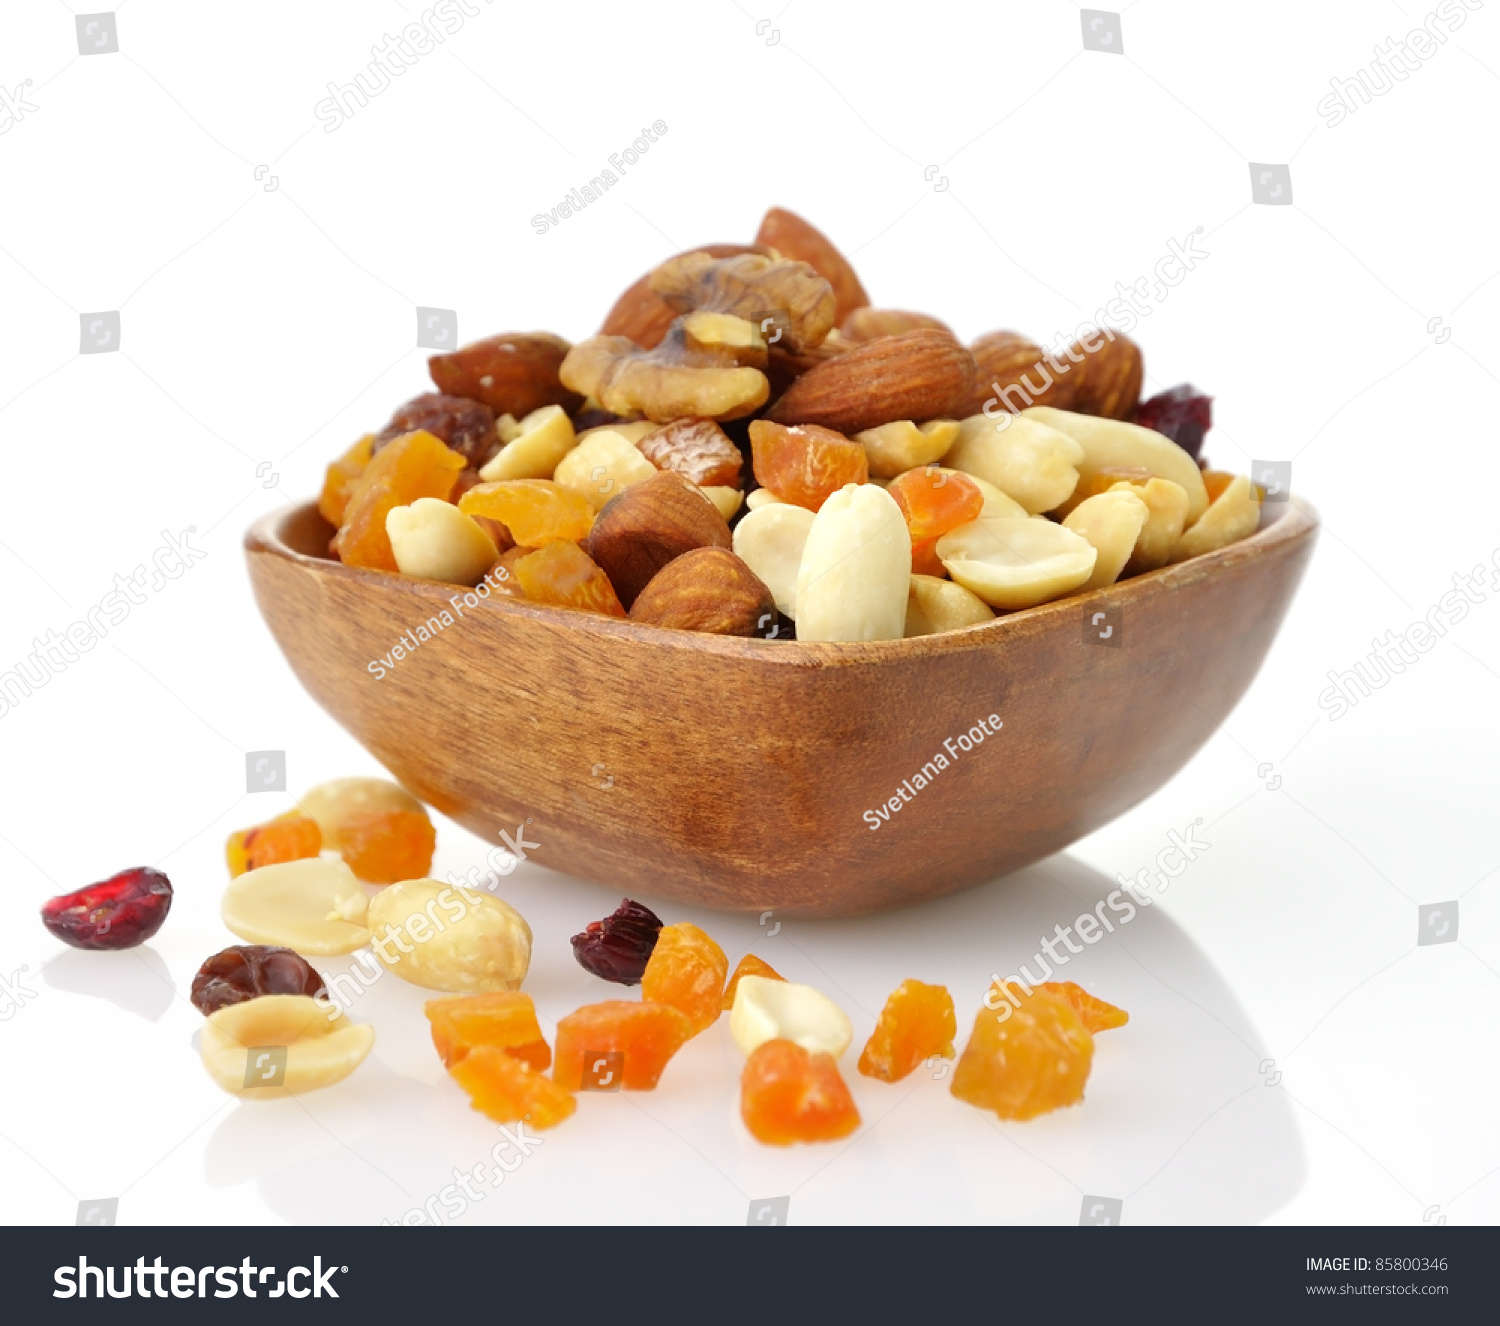 Delicious and healthy mixed dried fruit, nuts and seeds #85800346